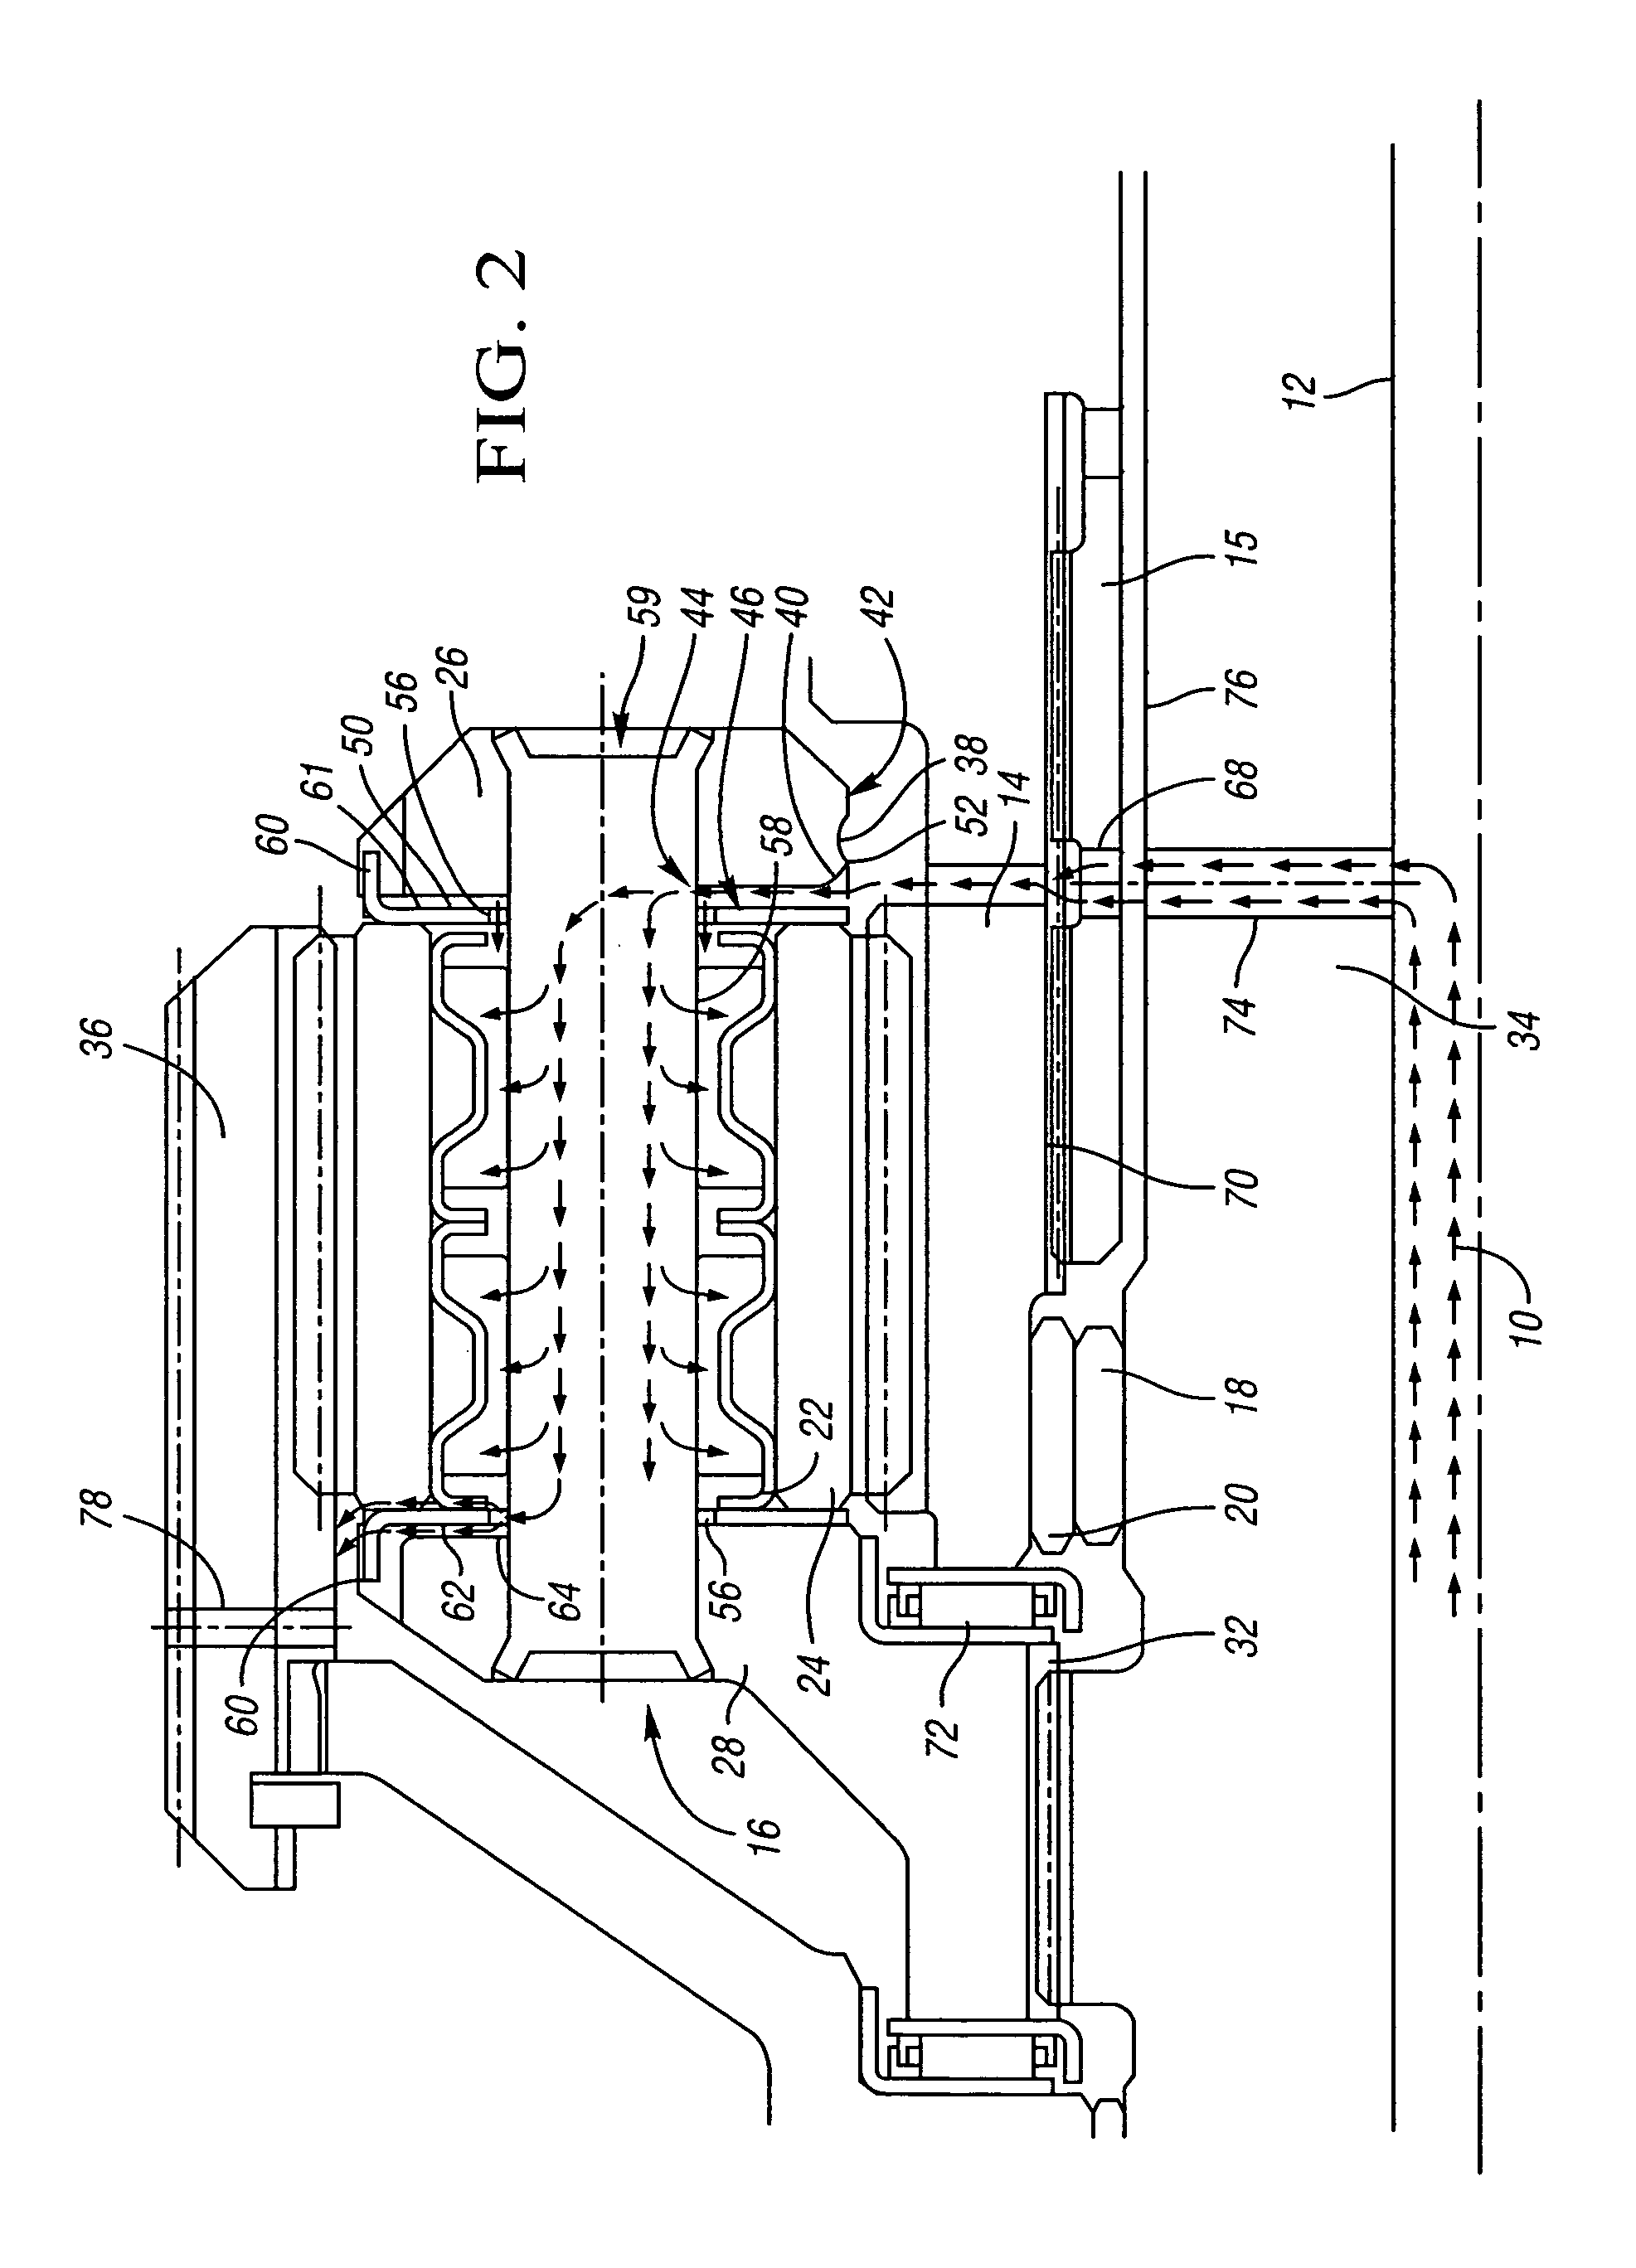 Lubrication system and method for hybrid electro-mechanical planetary transmission components